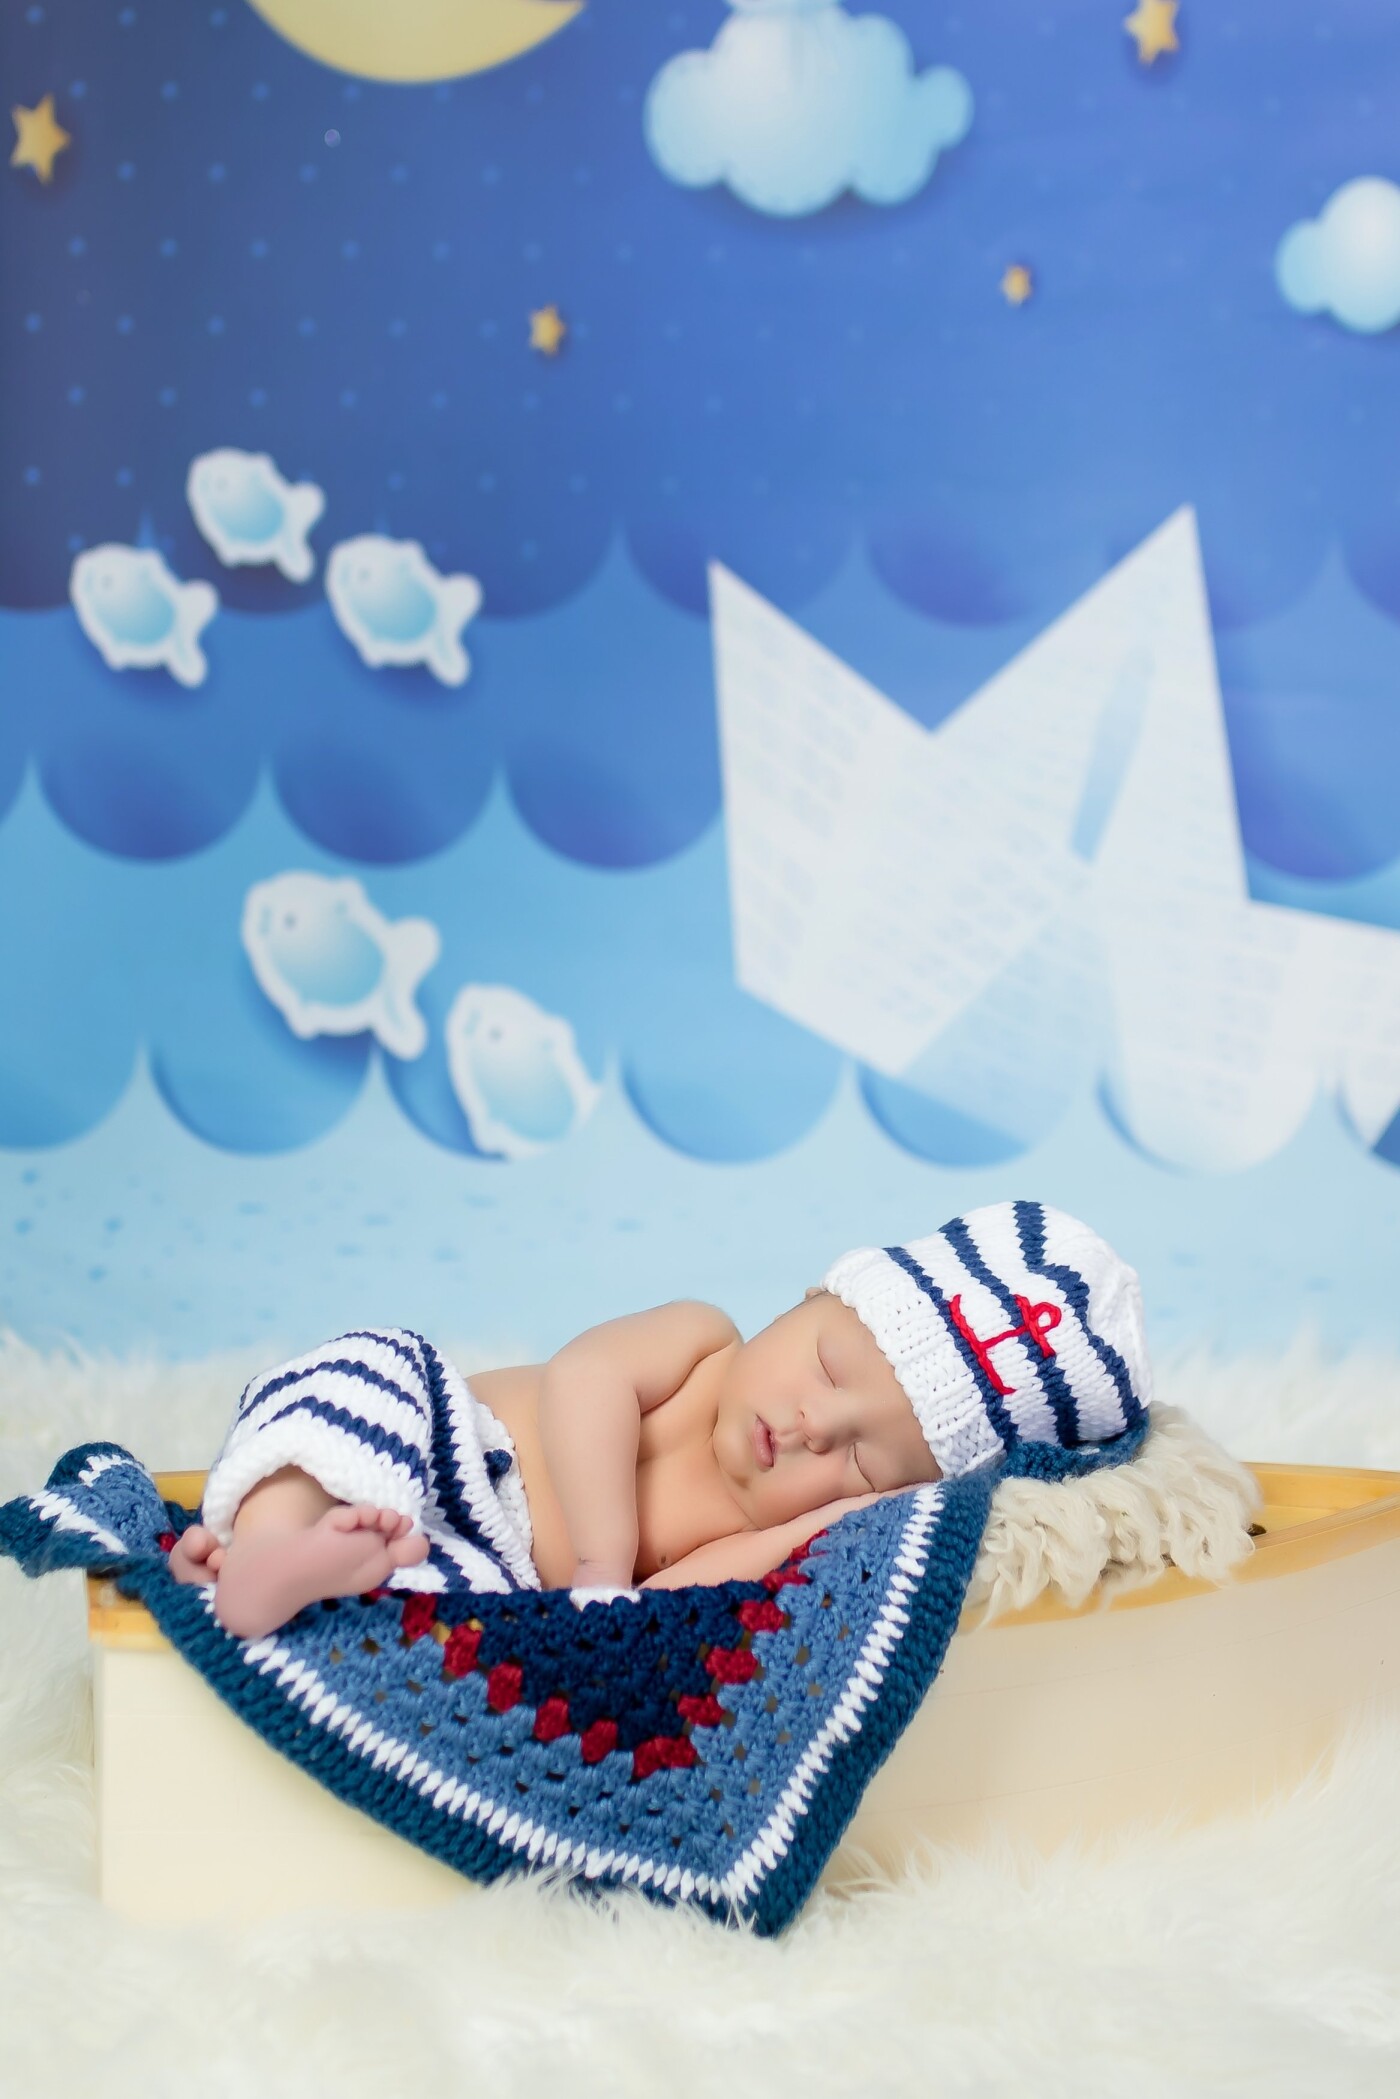 Oh this cute baby was a treat!   Momma requested nautical theme to match baby's nursery and he slept away in his little comfy dream boat.   